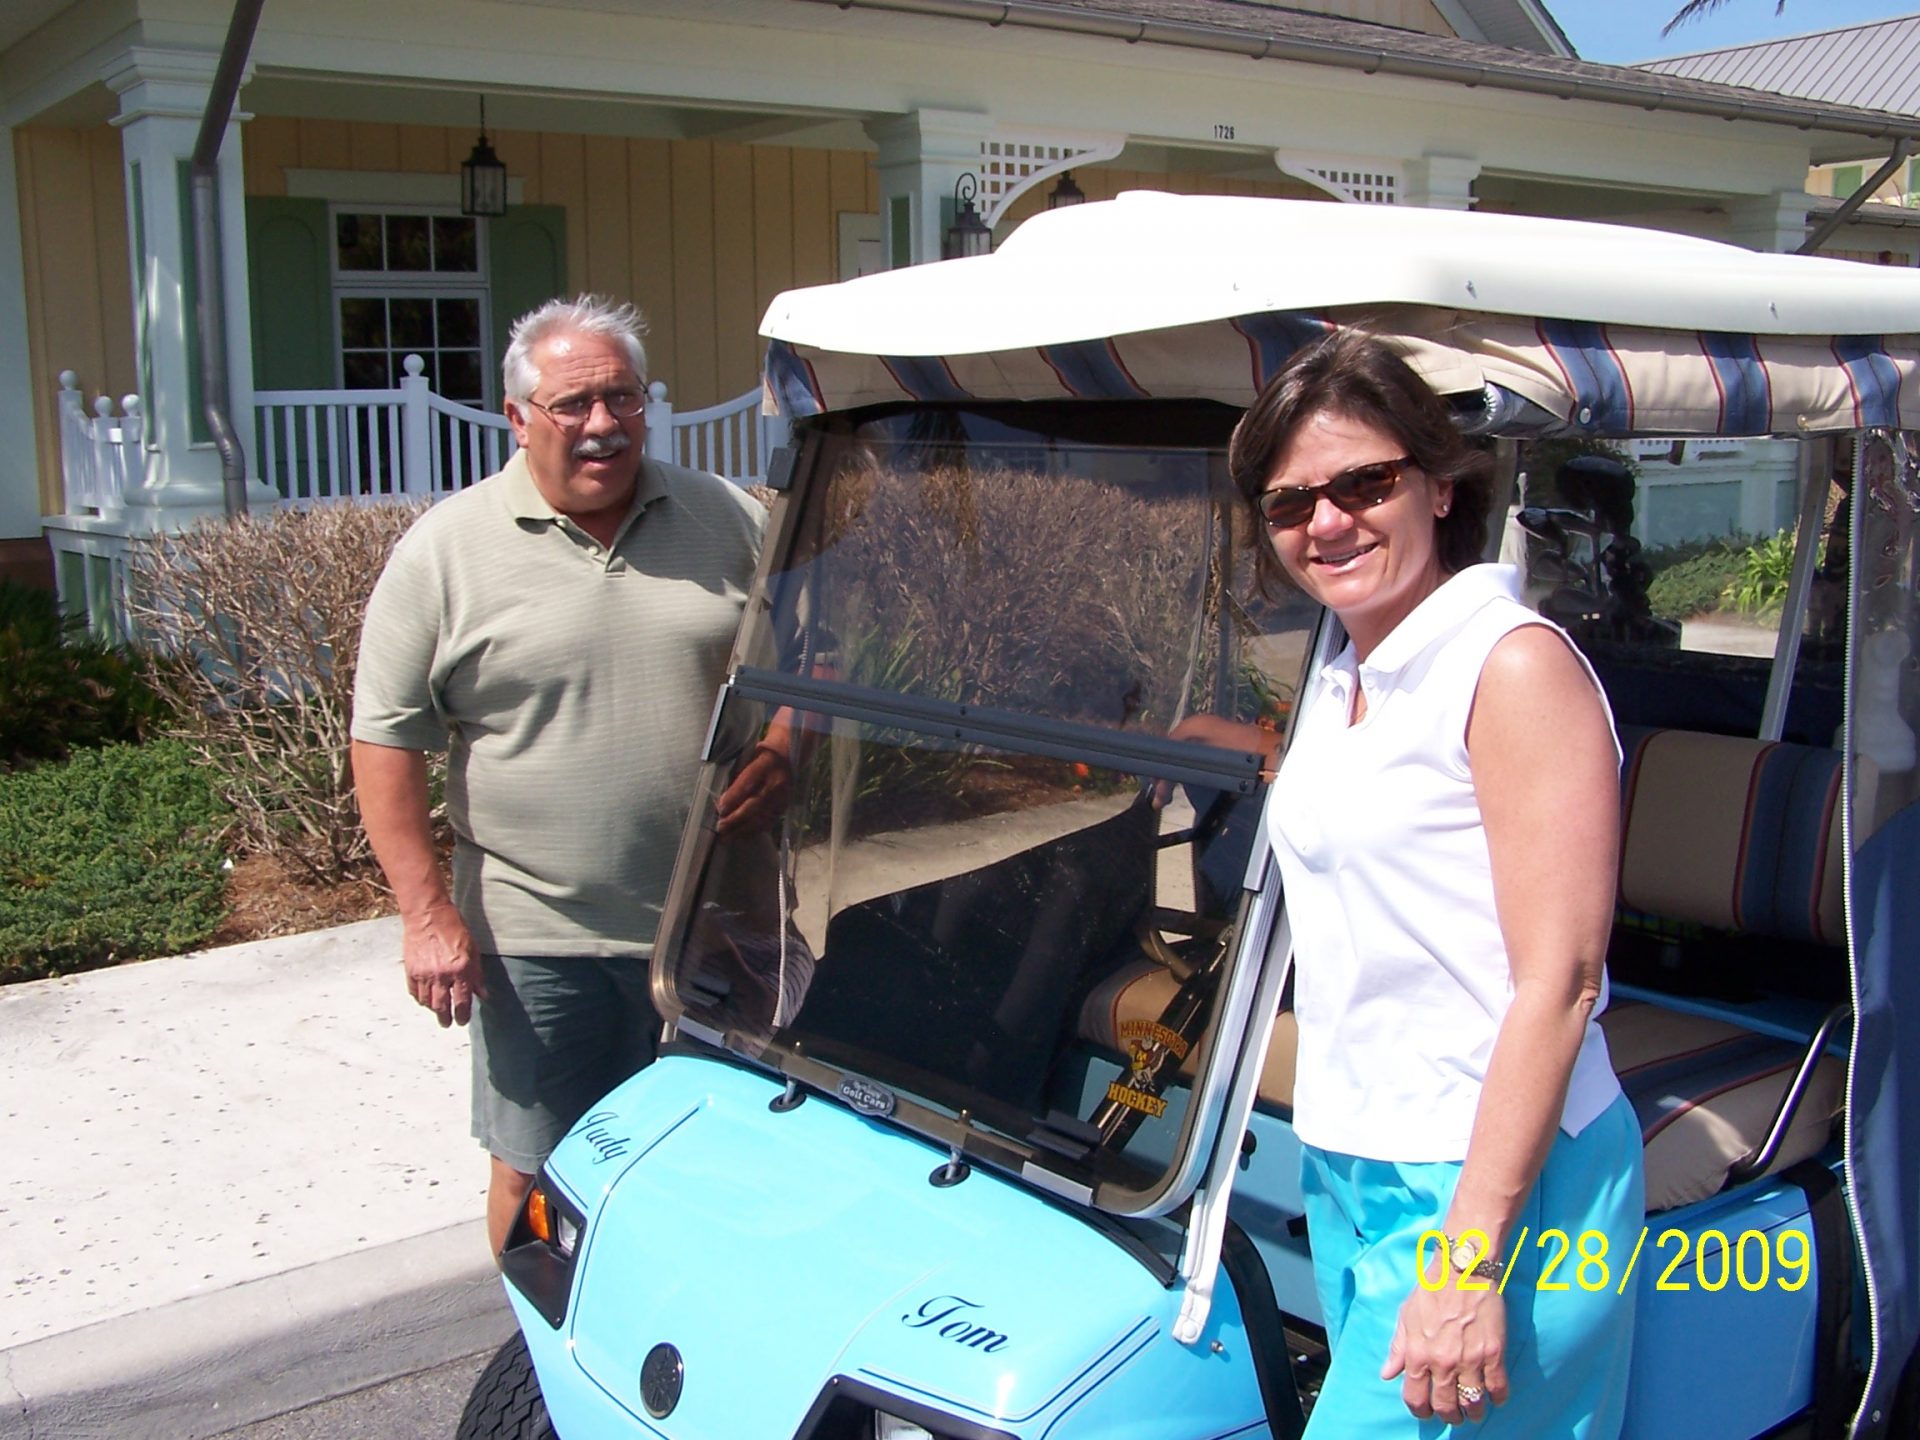 Tom was so proud of his golf cart!